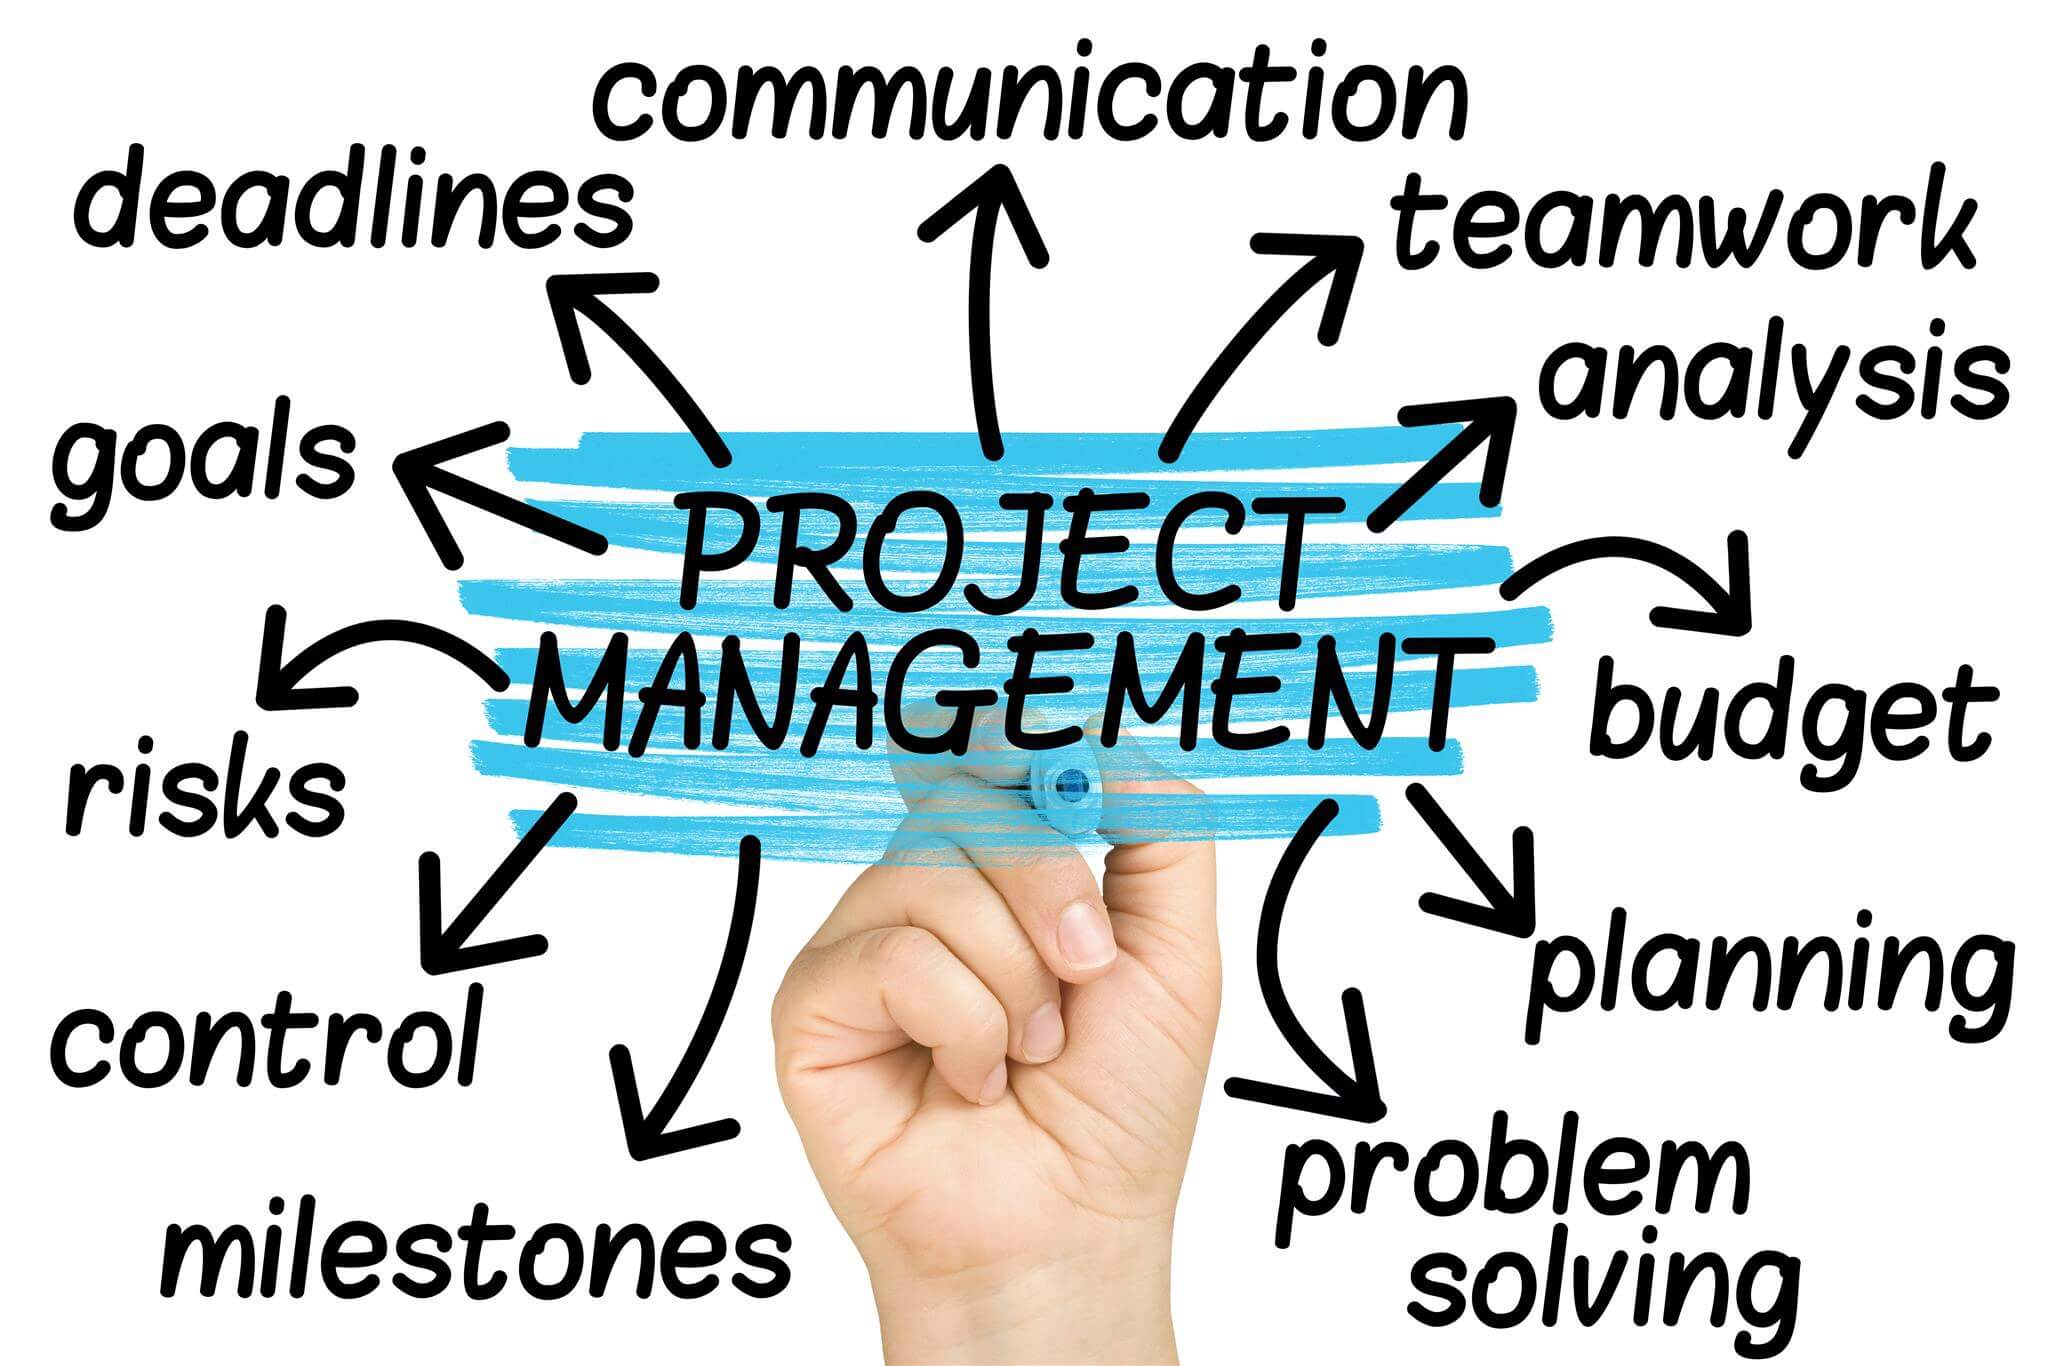 Qualities of a good project manager